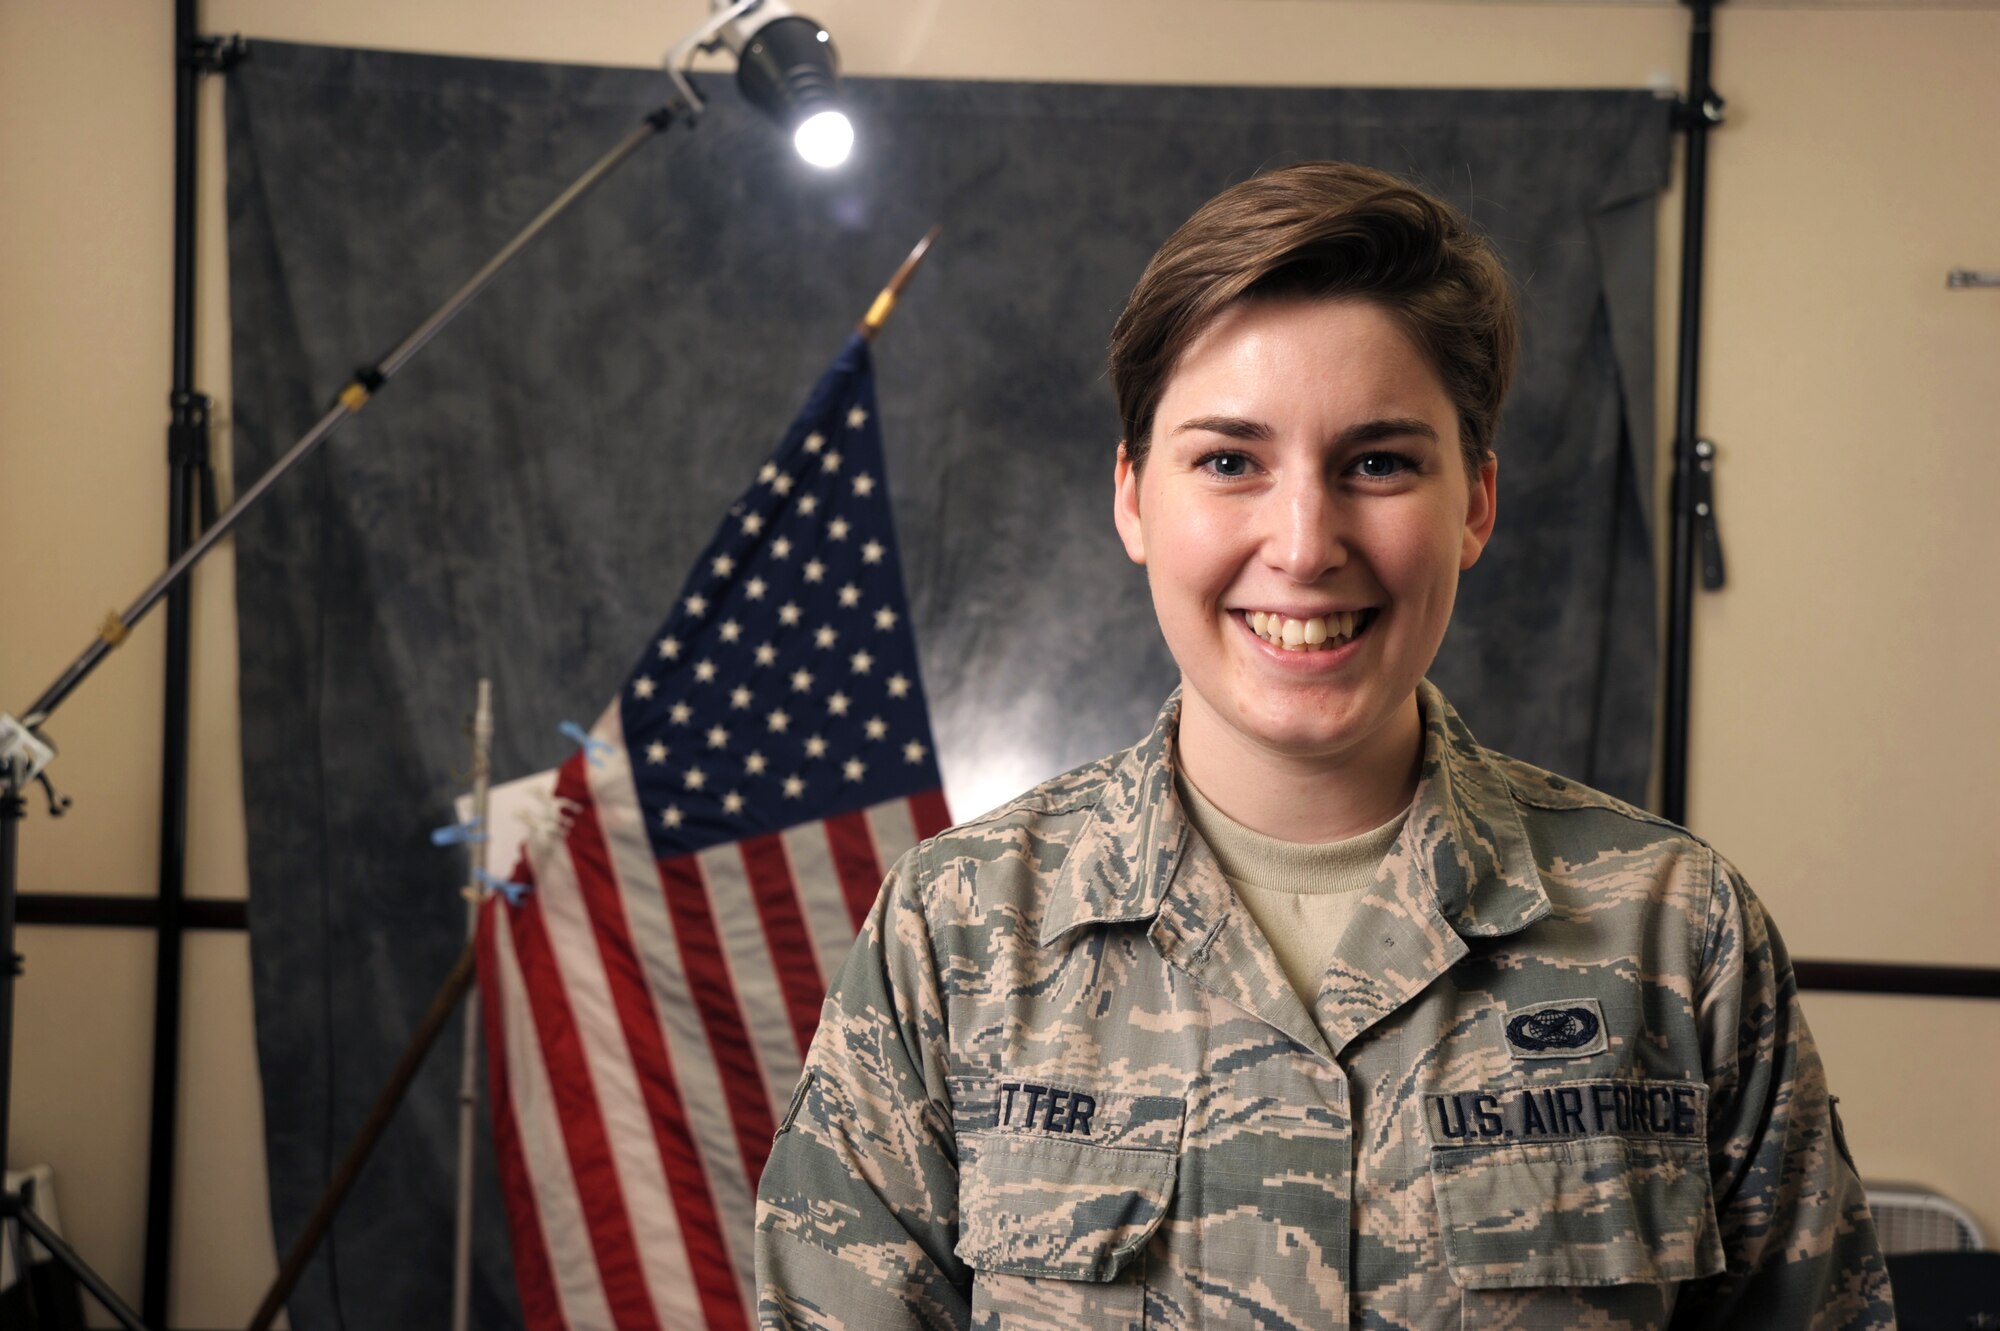 U.S. Air Force Airman 1st Class Jordyn Fetter, a photojournalist with the 35th Fighter Wing public affairs, poses for a picture at Misawa Air Base, Japan, Jan. 21, 2016. Fetter was chosen for Wild Weasel of the Week based on superior performance, outstanding work ethic and overall good conduct and discipline. (U.S. Air Force photo by U.S. Air Force photo by Senior Airman Brittany A. Chase)